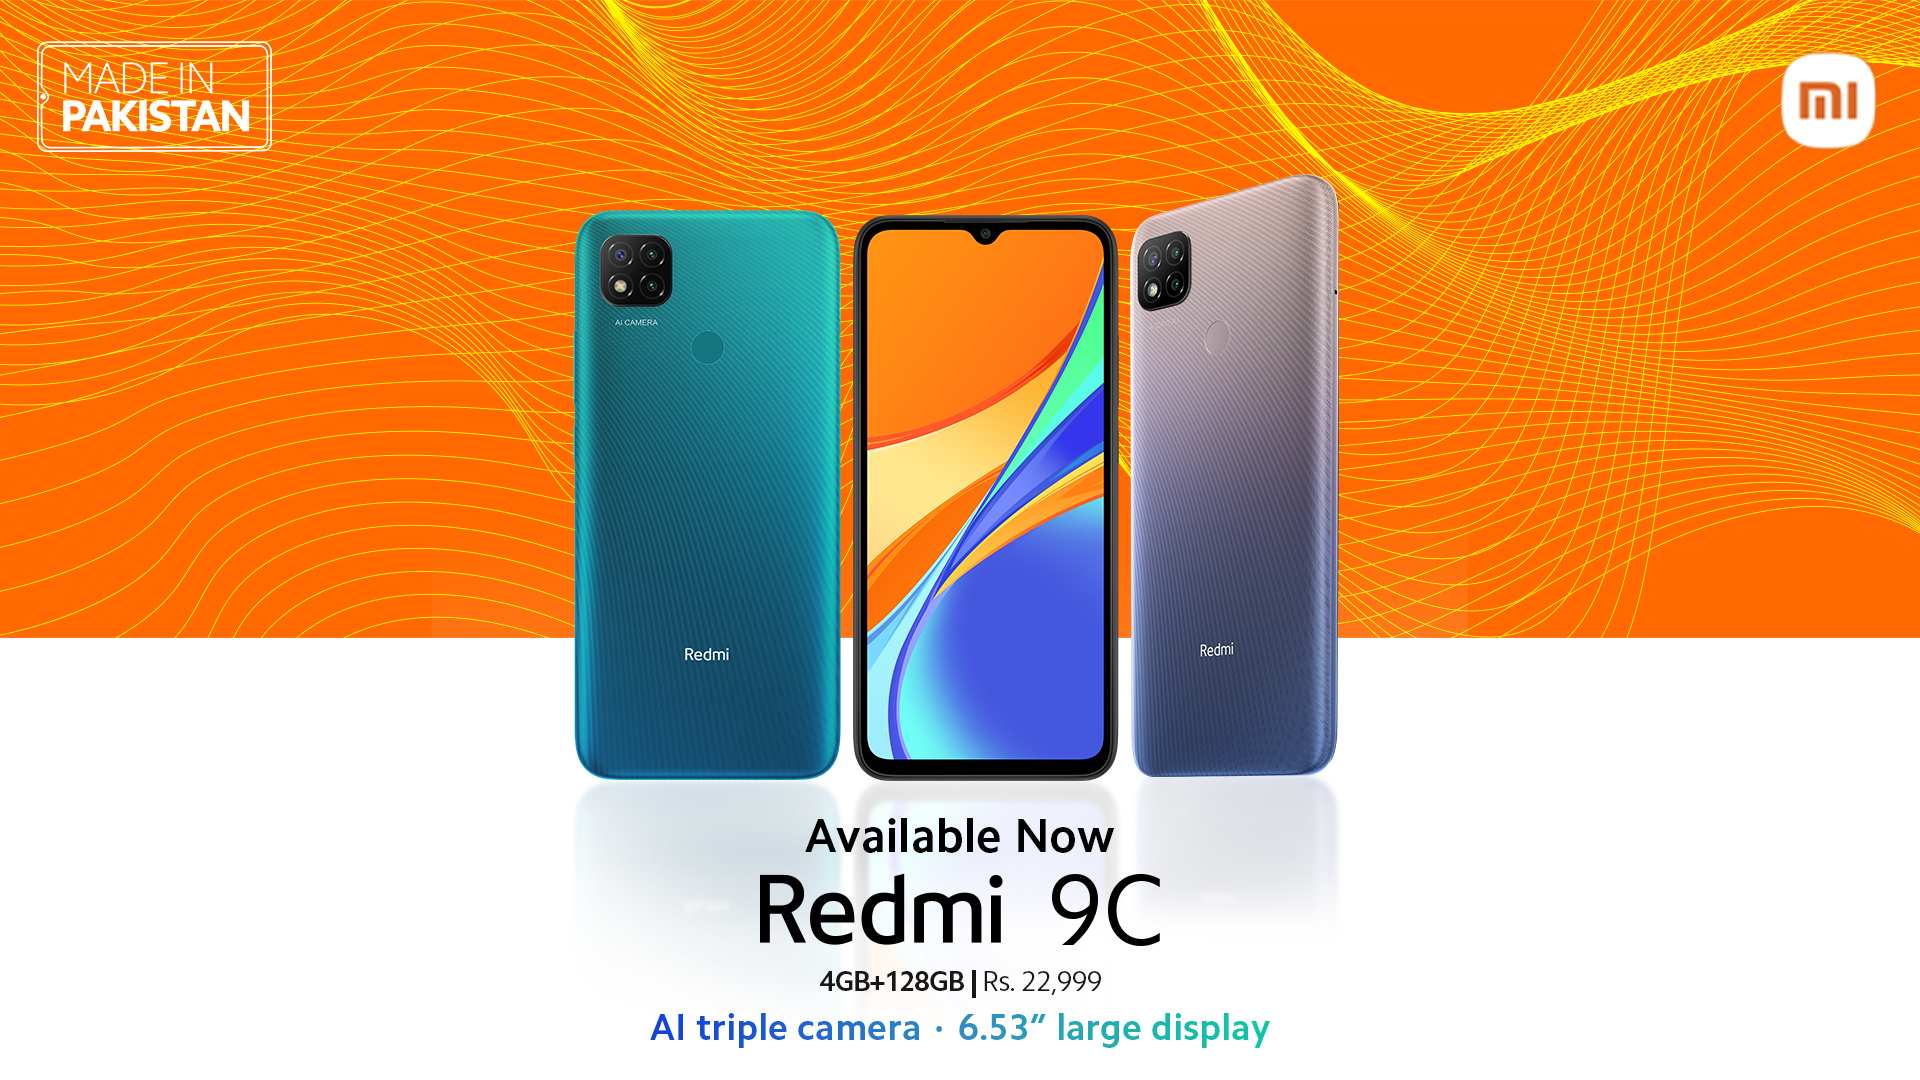 Redmi 9C - First in the legacy of Made in Pakistan